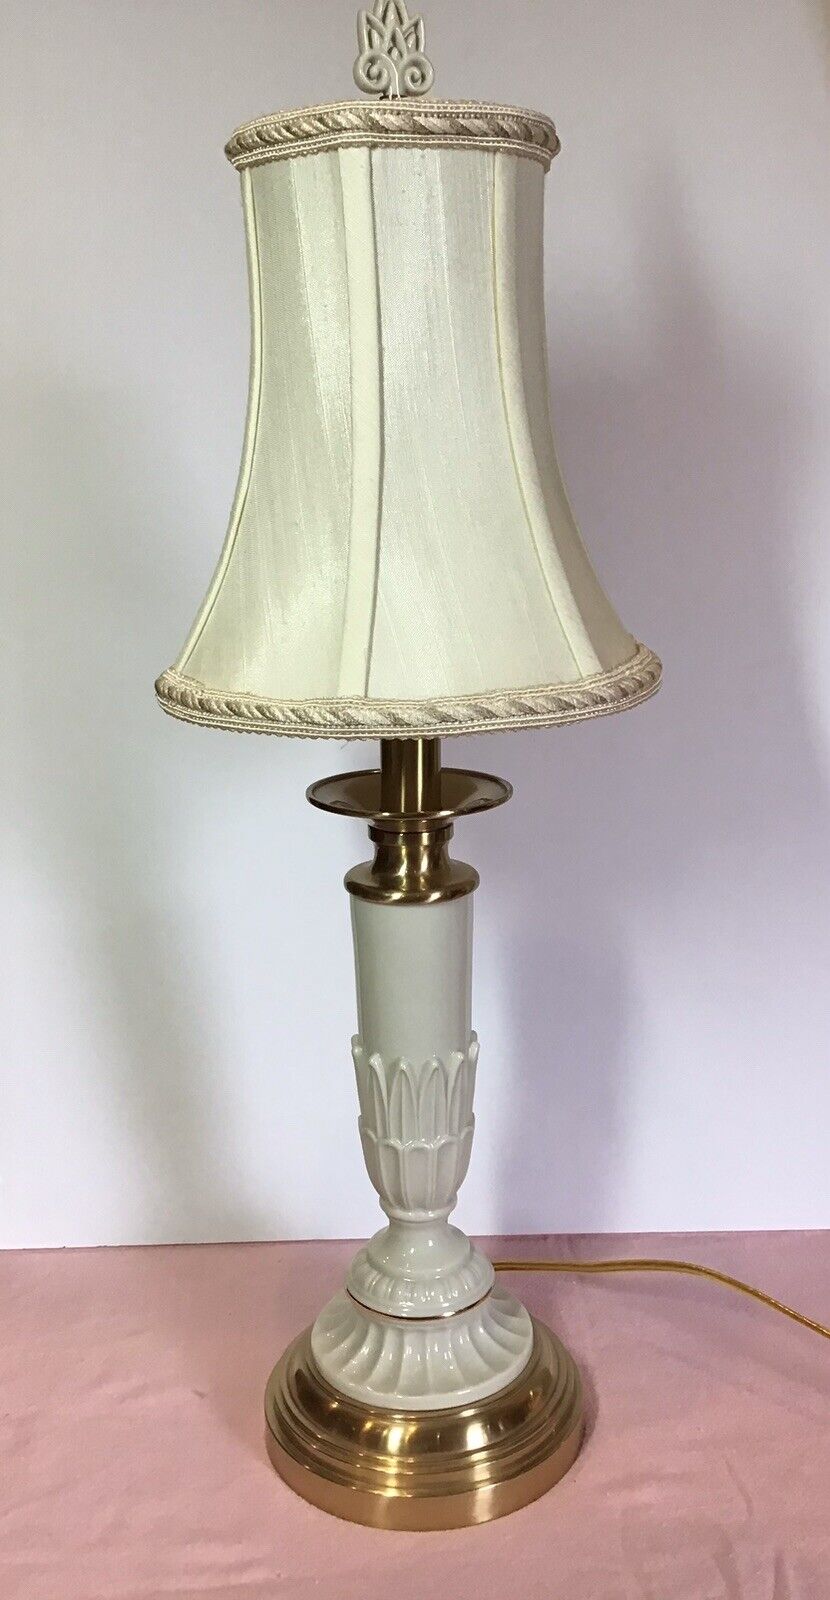 LENOX /QUOIZEL TABLE LAMP WITH ORIGINAL SHADE